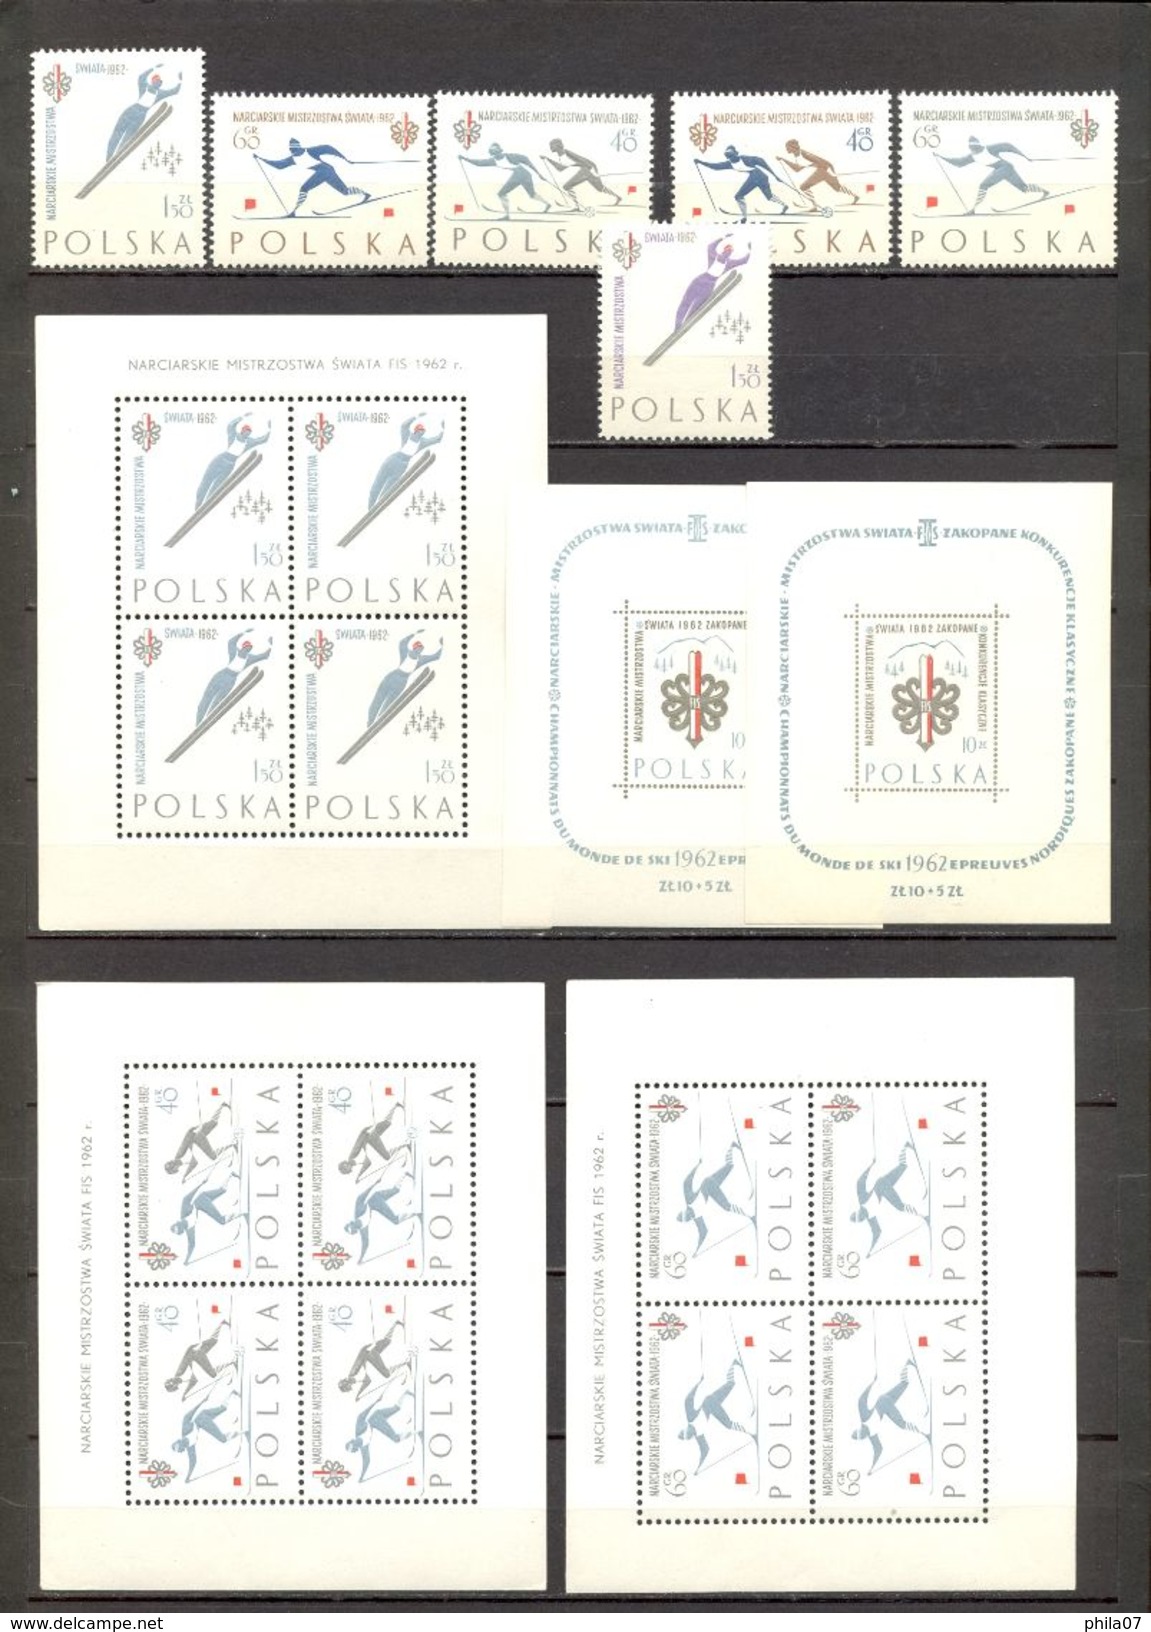 Poland - 1962, SWIATA FIS, Two Blocks, Sheet And Series, All MNH. / See Scans, 5 Scans - Neufs